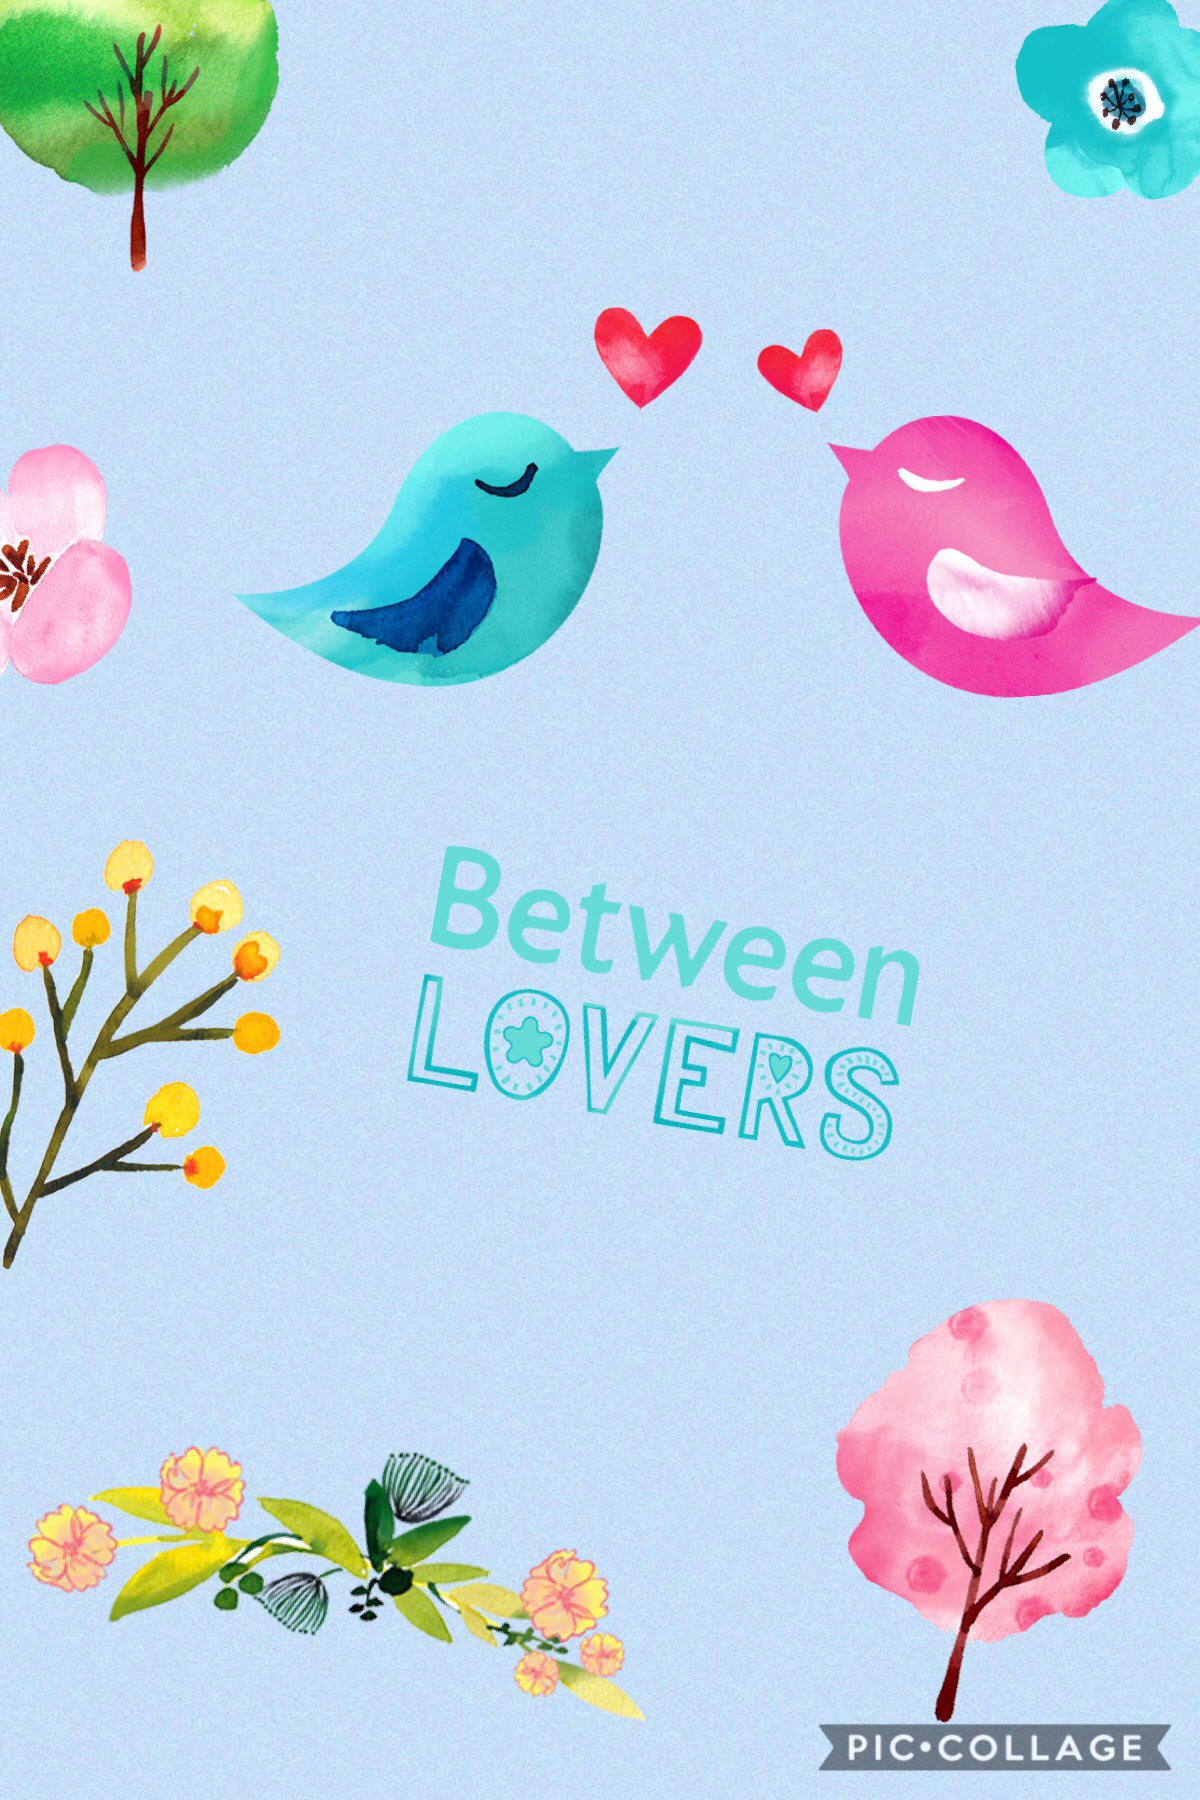 New sticker pack called between lovers!